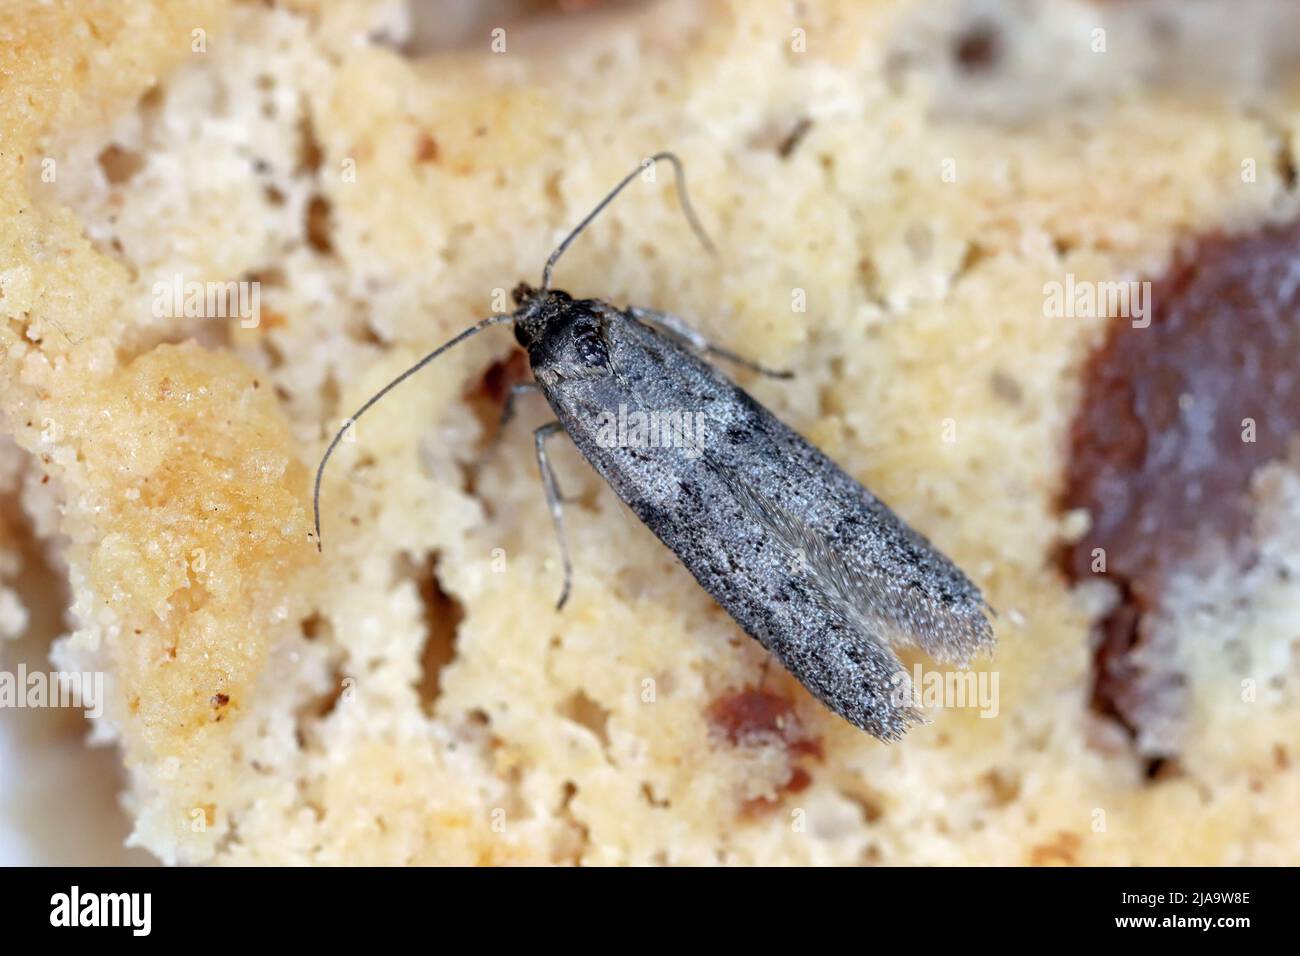 The almond moth or tropical warehouse moth Cadra cautella Pyralidae. It is a stored-product pest. Adult insect (moth) - high magnification. Stock Photo